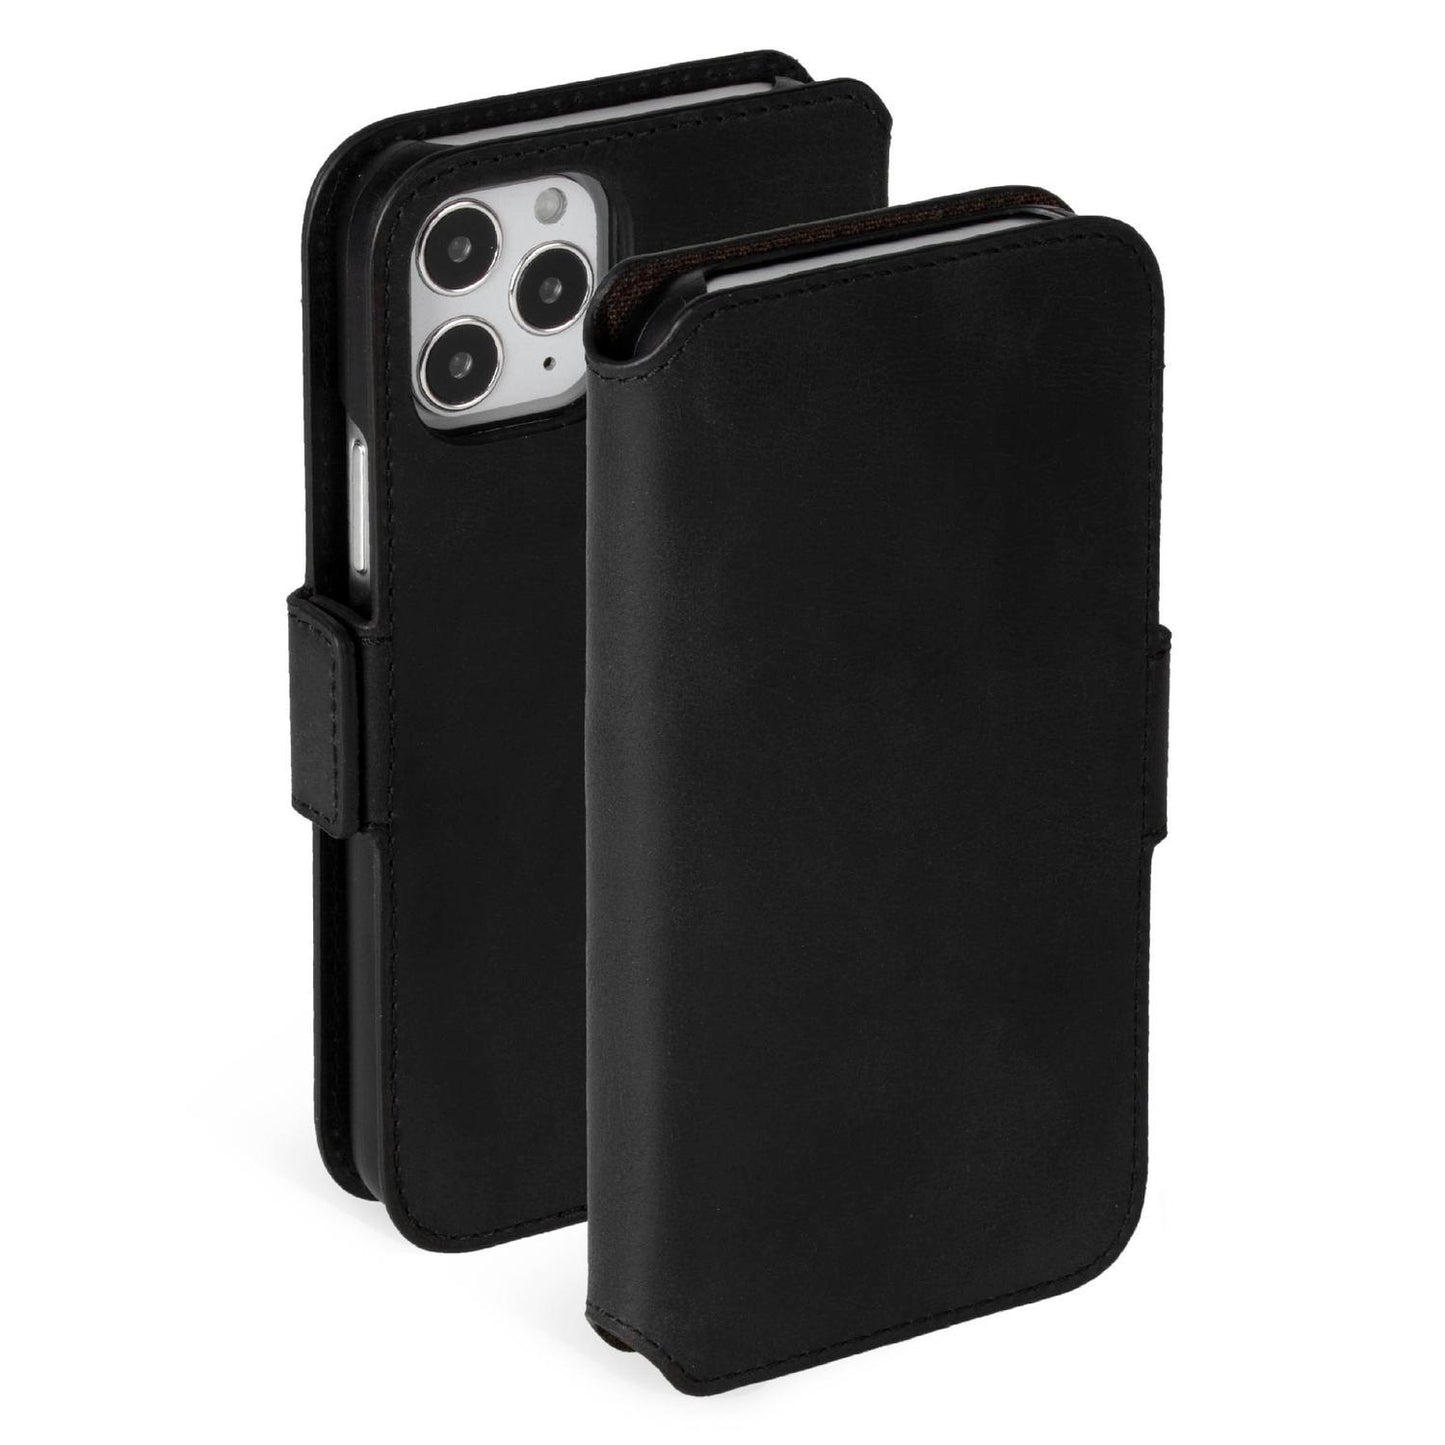 Sunne Phone Wallet for iPhone 12 Mini